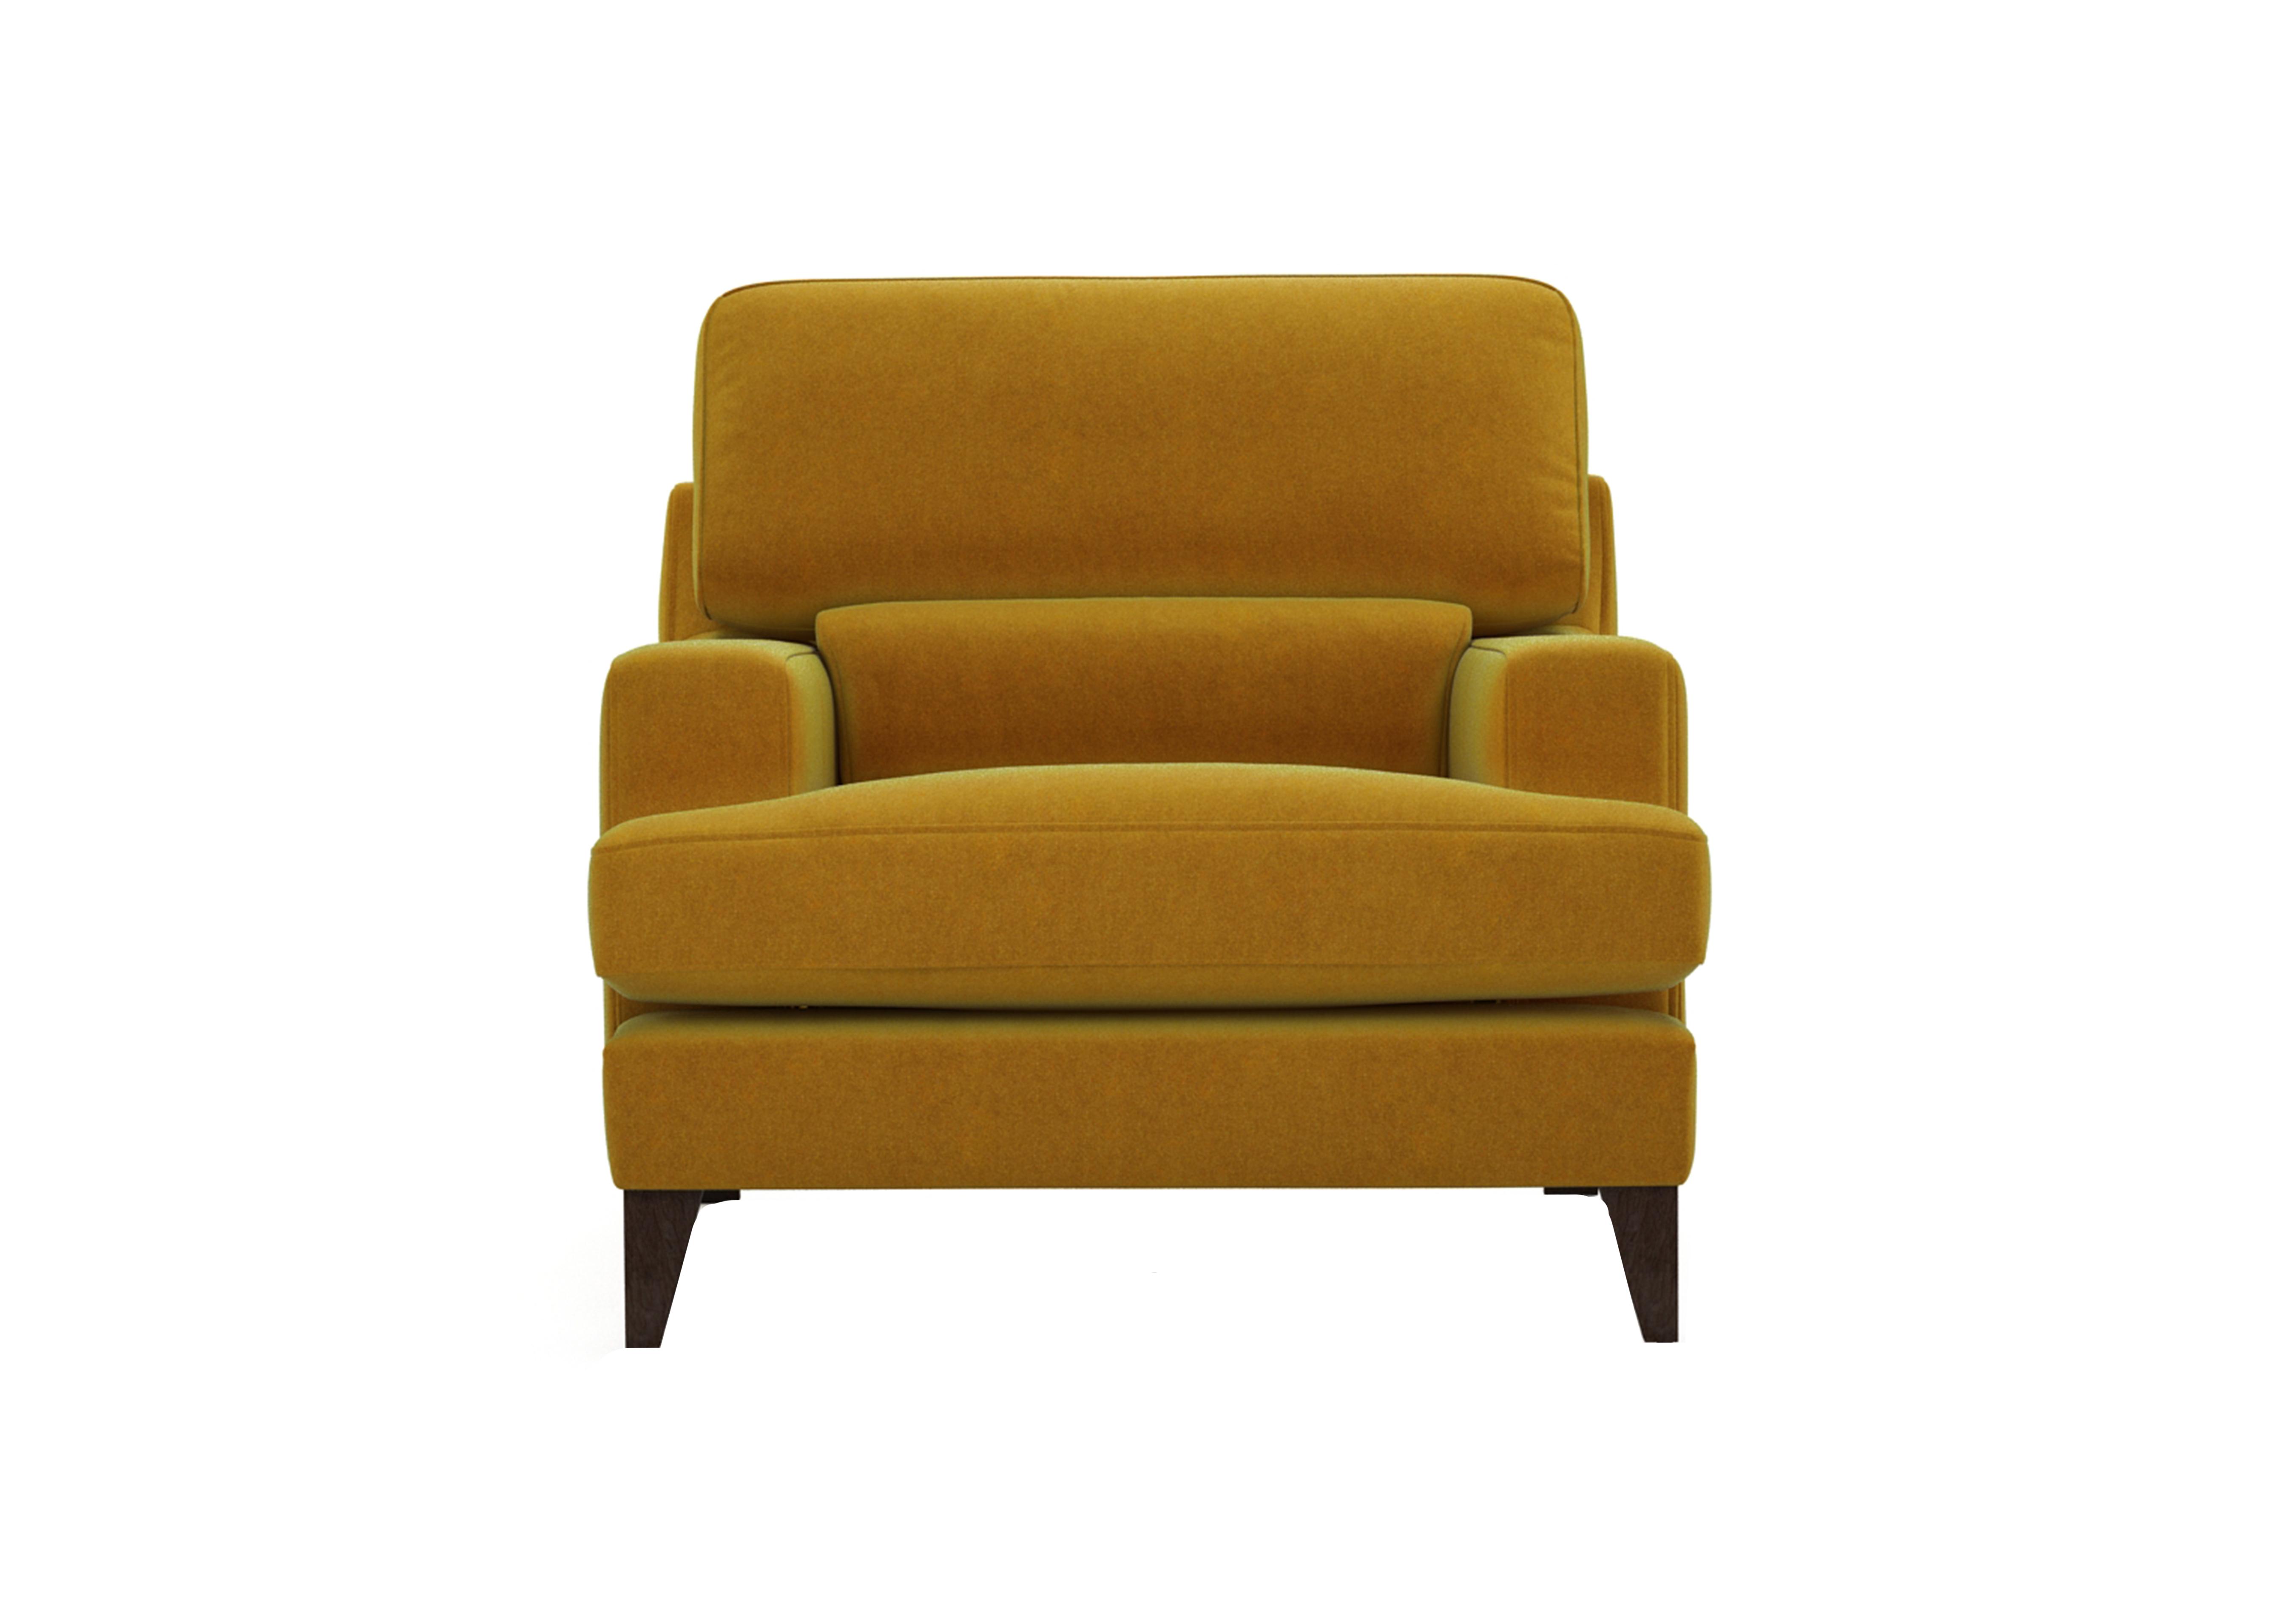 Romilly Fabric Armchair in Gol204 Golden Spice Wa Ft on Furniture Village